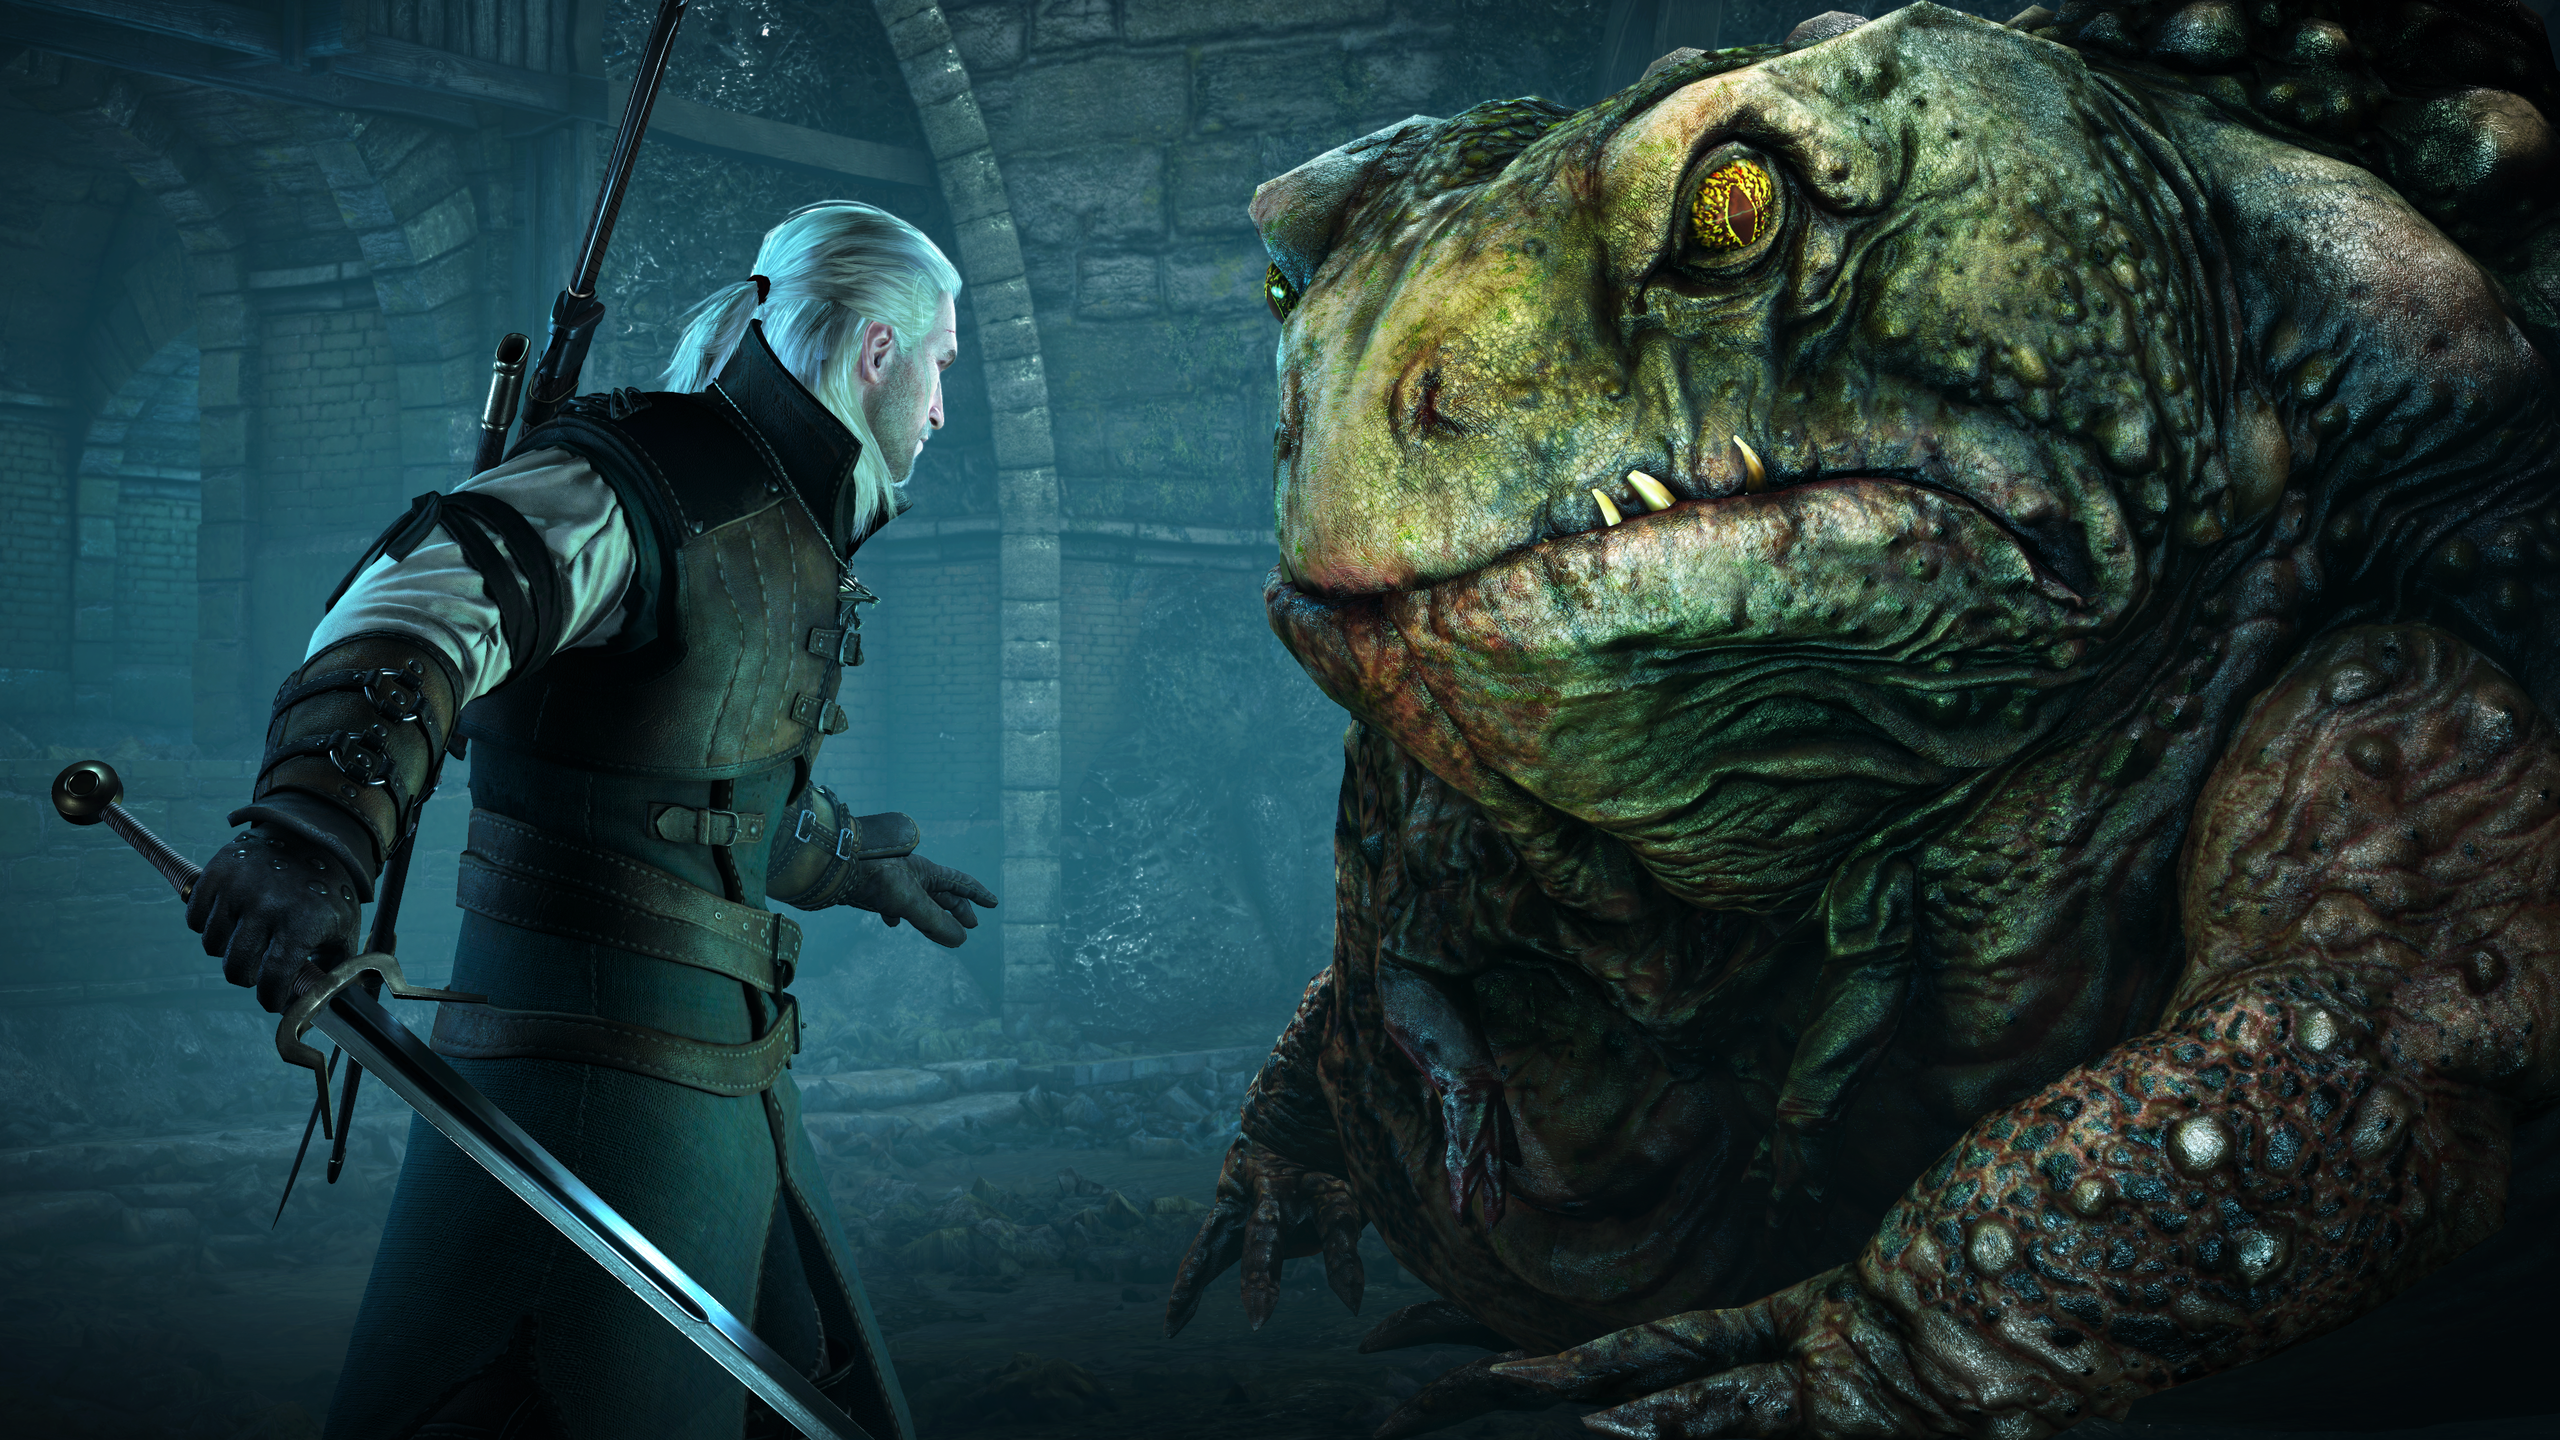 The Witcher The Witcher 3 Wild Hunt Geralt Of Rivia DLC Toad King Video Games The Witcher 3 Wild Hun 2560x1440